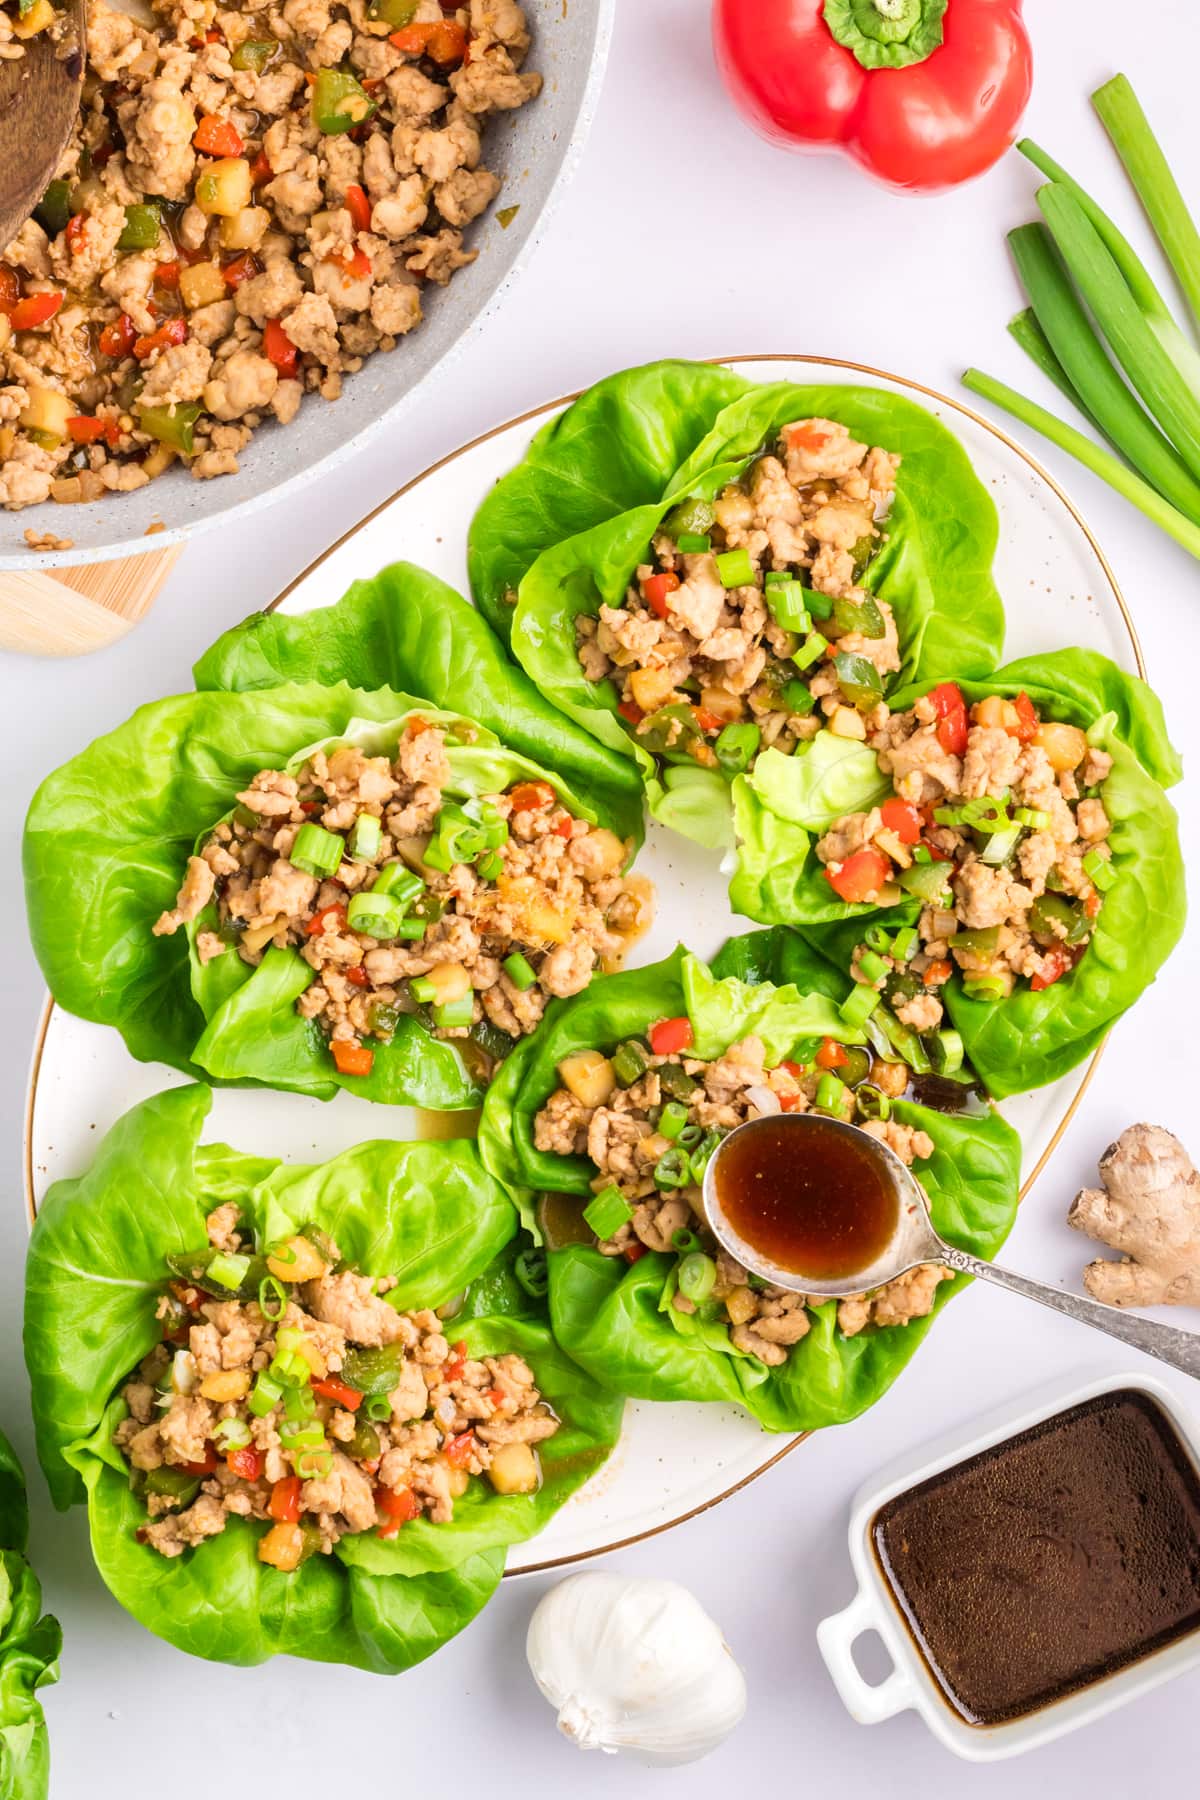 Overhead view of Asian lettuce wraps with chicken